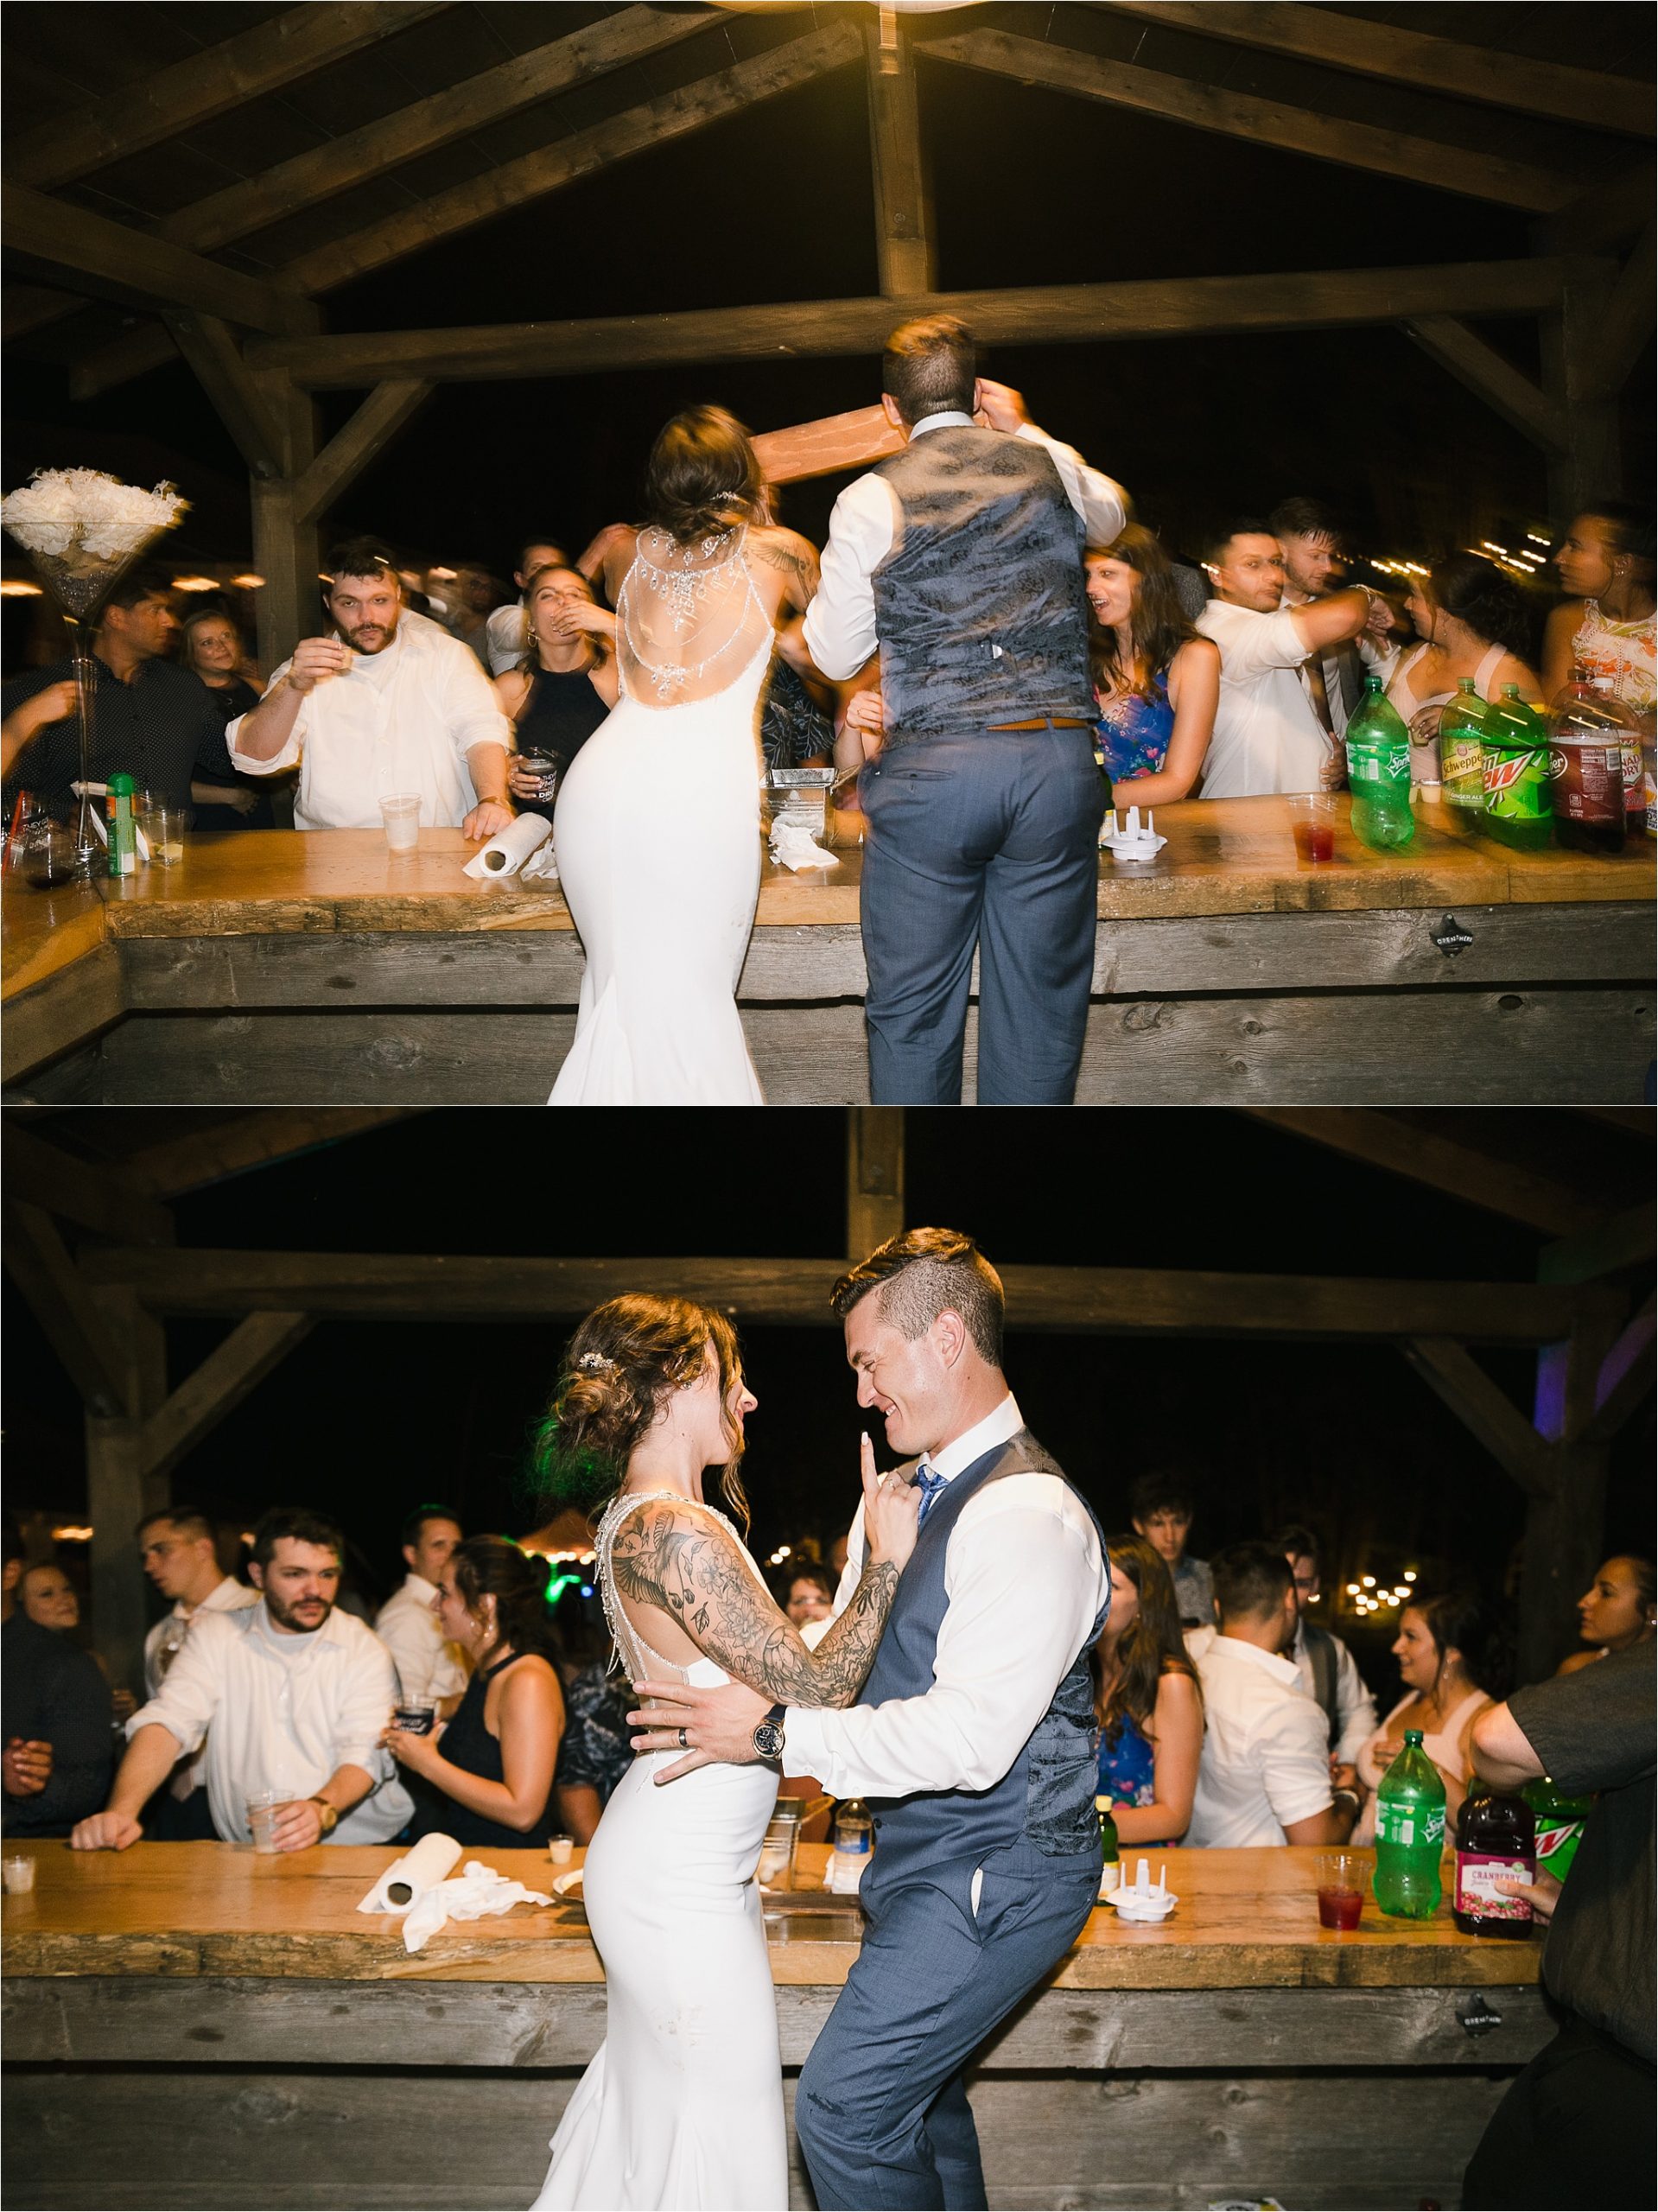 Sonia V Photography, The Clearing reception wedding venue, party dancing, shots